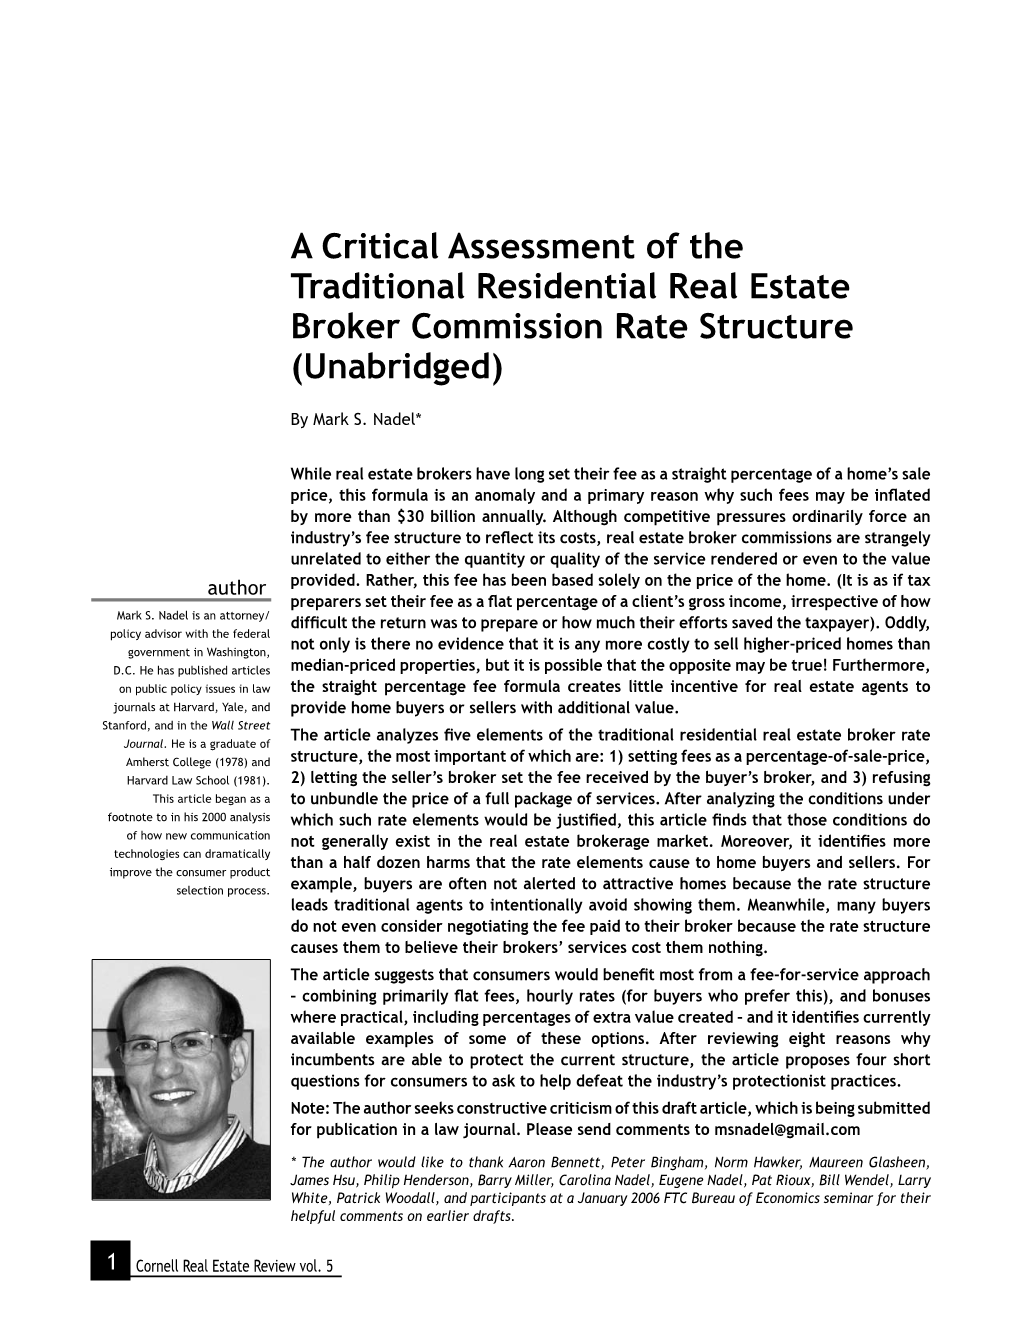 A Critical Assessment of the Traditional Residential Real Estate Broker Commission Rate Structure (Unabridged)